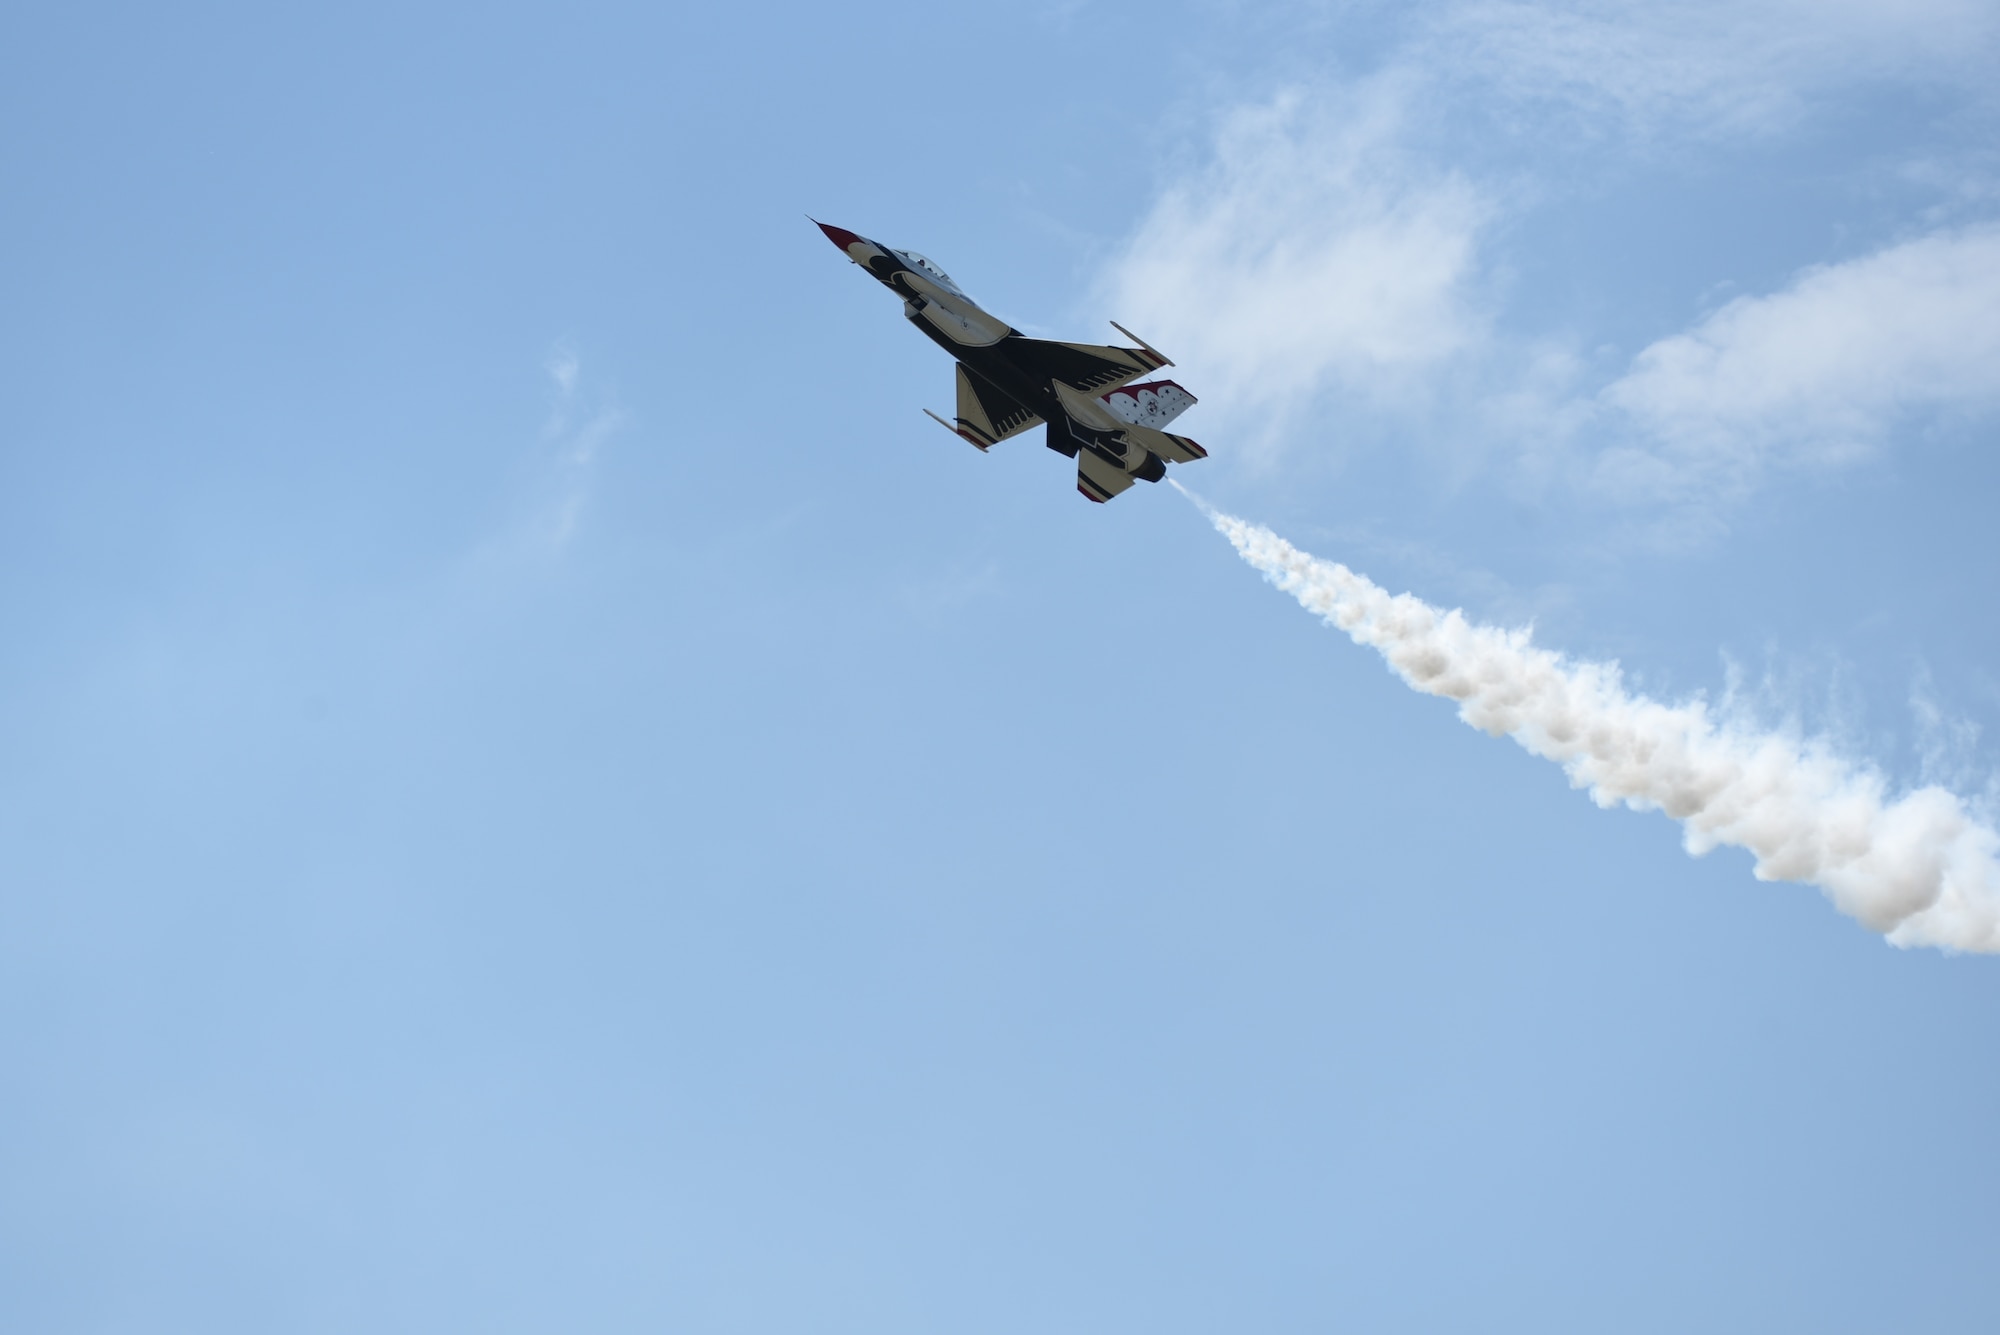 The U.S. Air Force Thunderbirds perform aerial acrobatics during Cheyenne Frontier Days in Cheyenne Wyo., July 25, 2018. The 3600th Air Demonstration unit, the official Air Force Air Demonstration team, was activated May 25, 1953. The unit adopted the name “Thunderbirds,” influenced in part by the strong Native American culture and folklore from the southwestern United States where Luke Air Force Base, Arizona, is located. The airshow provides a chance for the local community and worldwide visitors of CFD to see the U.S. Air Force in action over the skies of Cheyenne. (U.S. Air Force photo by Airman 1st Class Abbigayle Wagner)